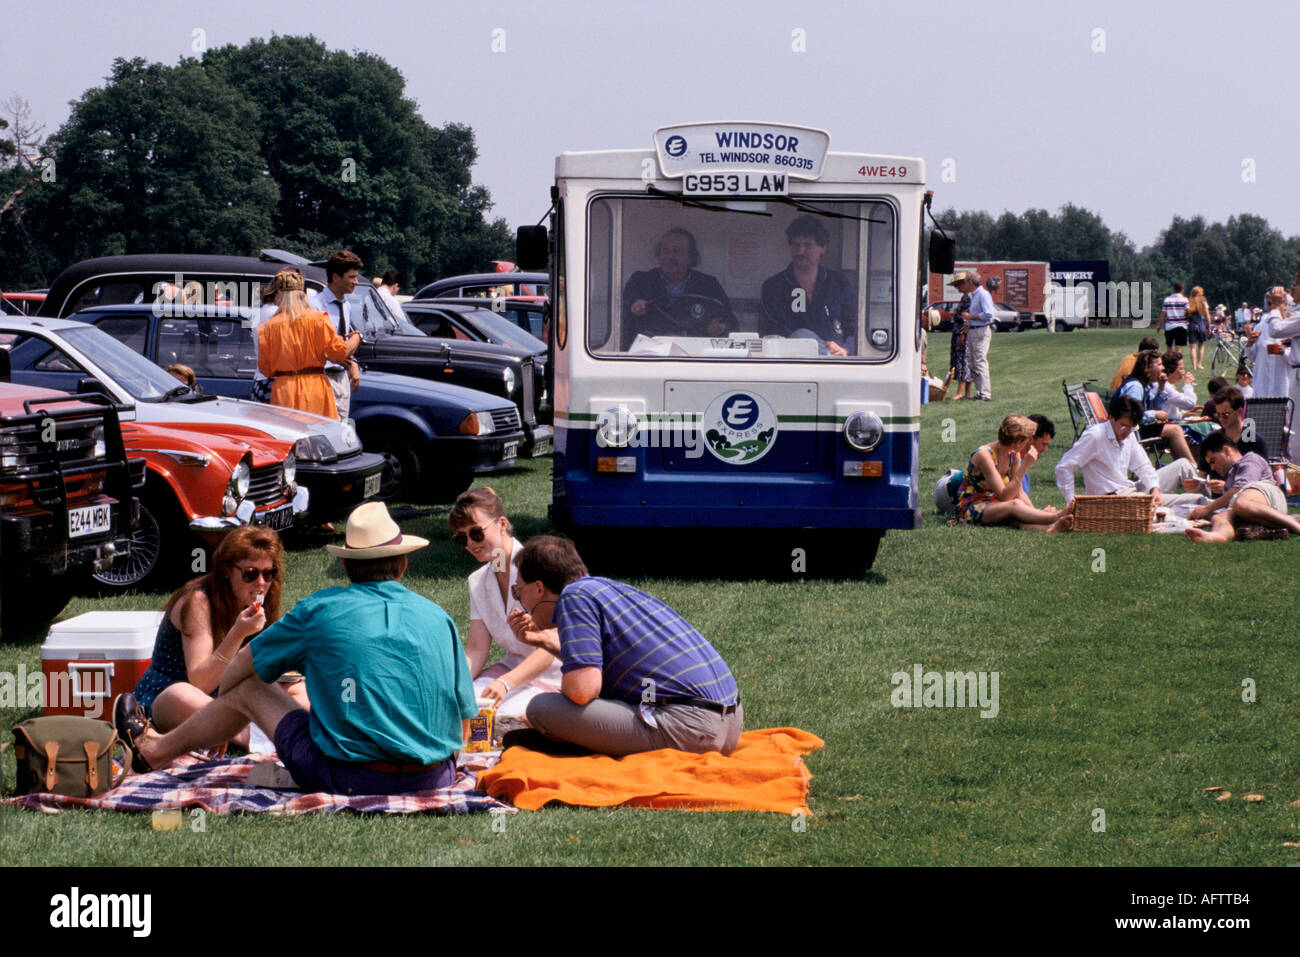 Milk van or milk float making a delivery to car park at Windsor Great Park people having picnic before the polo game starts. 1980s 80s UK HOMER SYKES Stock Photo